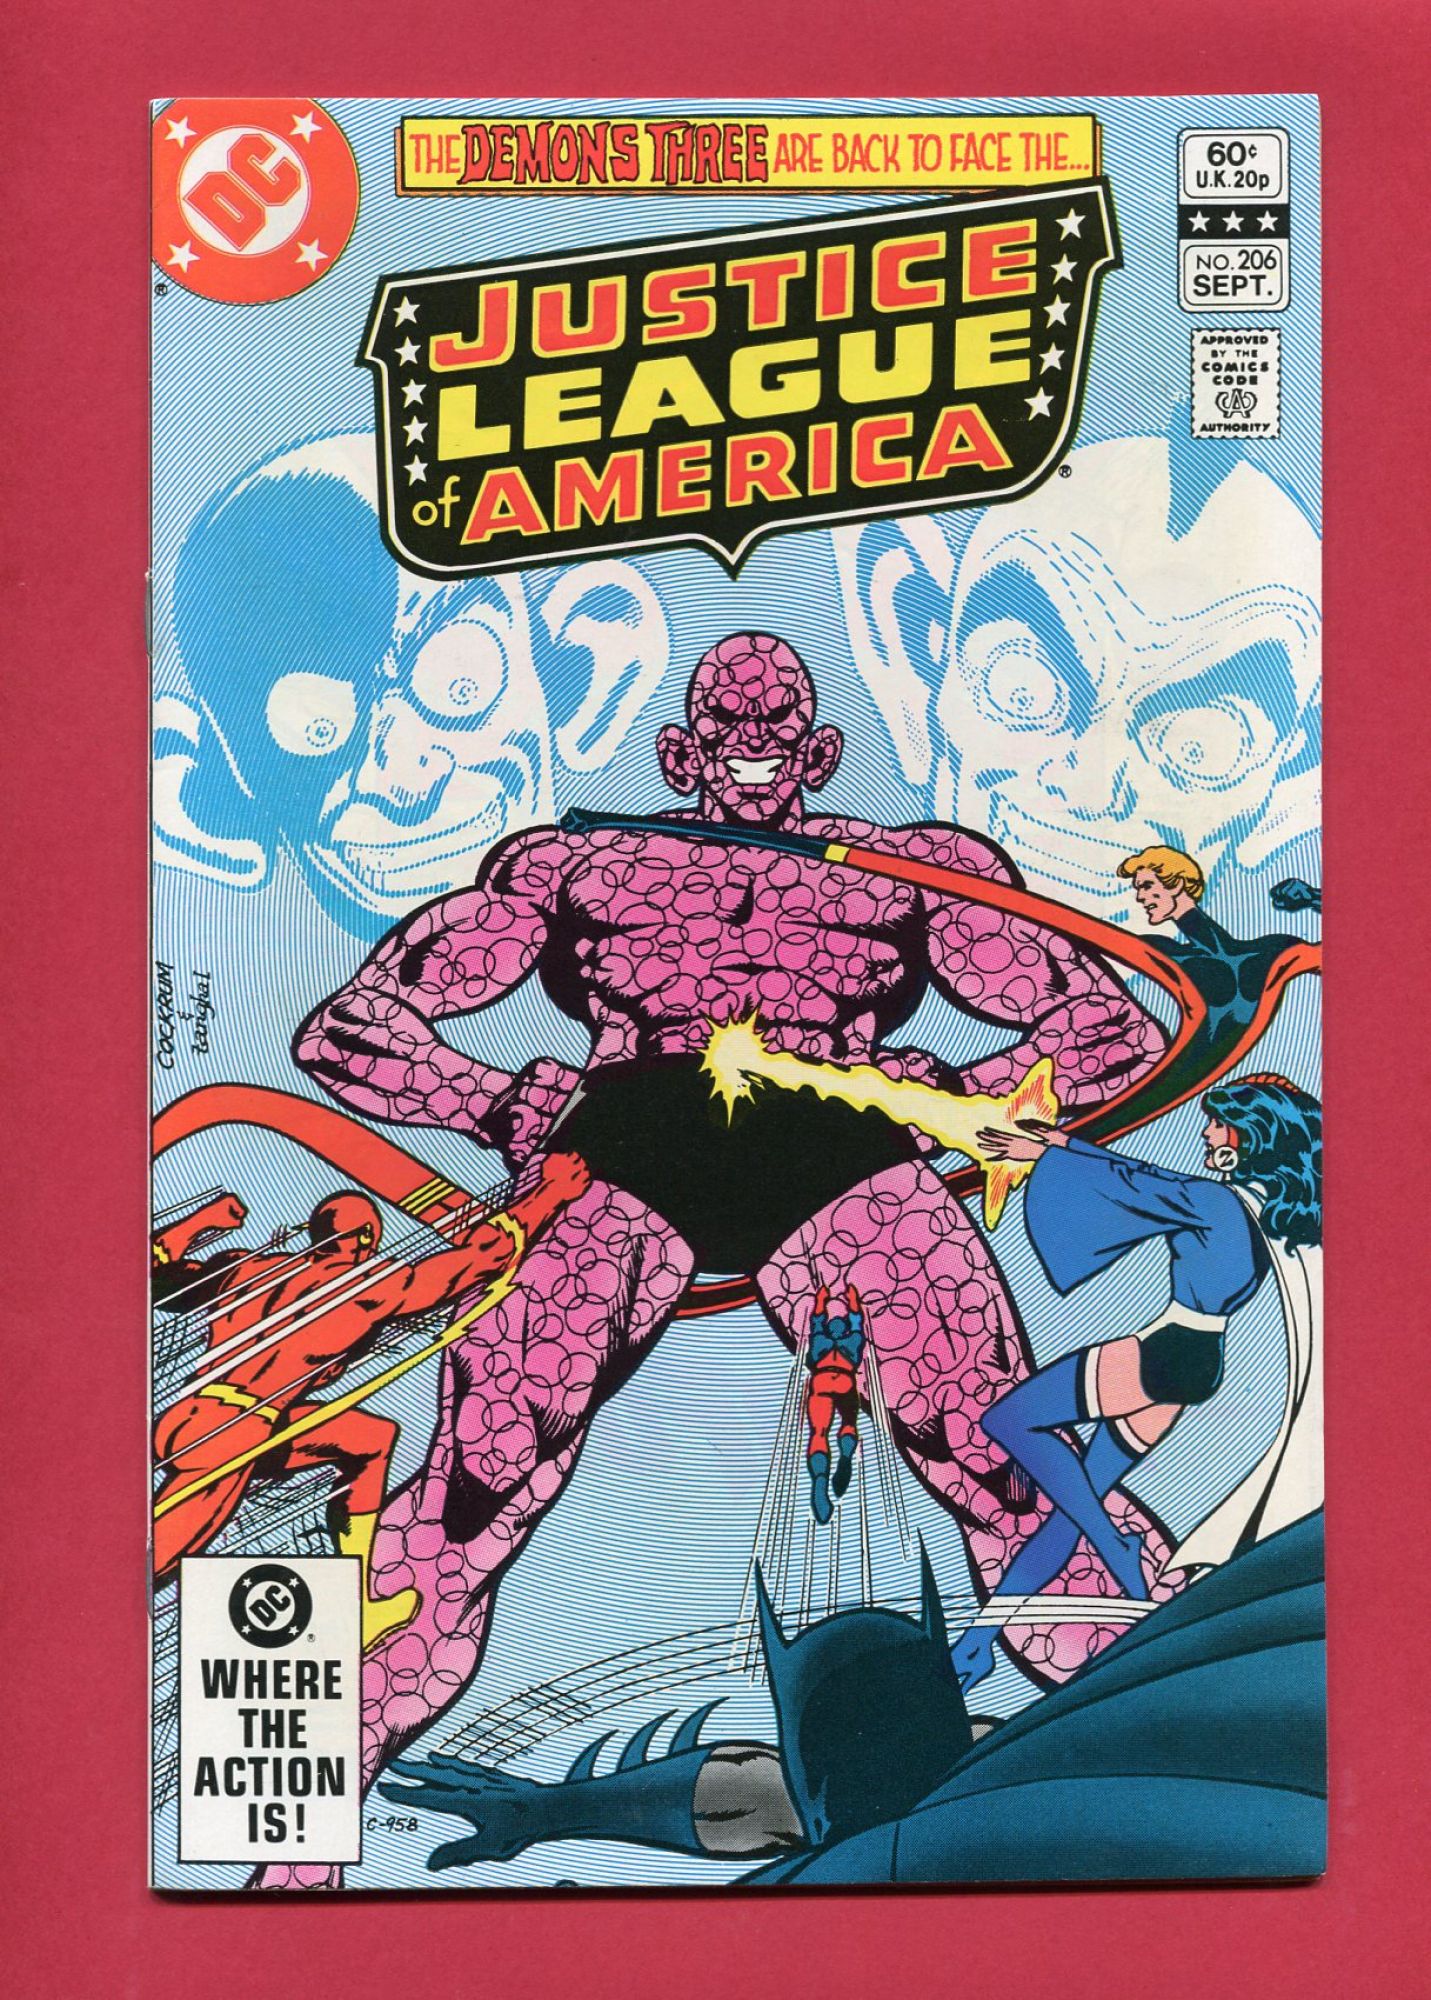 Justice League of America (Volume 1 1960) #206, Sep 1982, 8.5 VF+